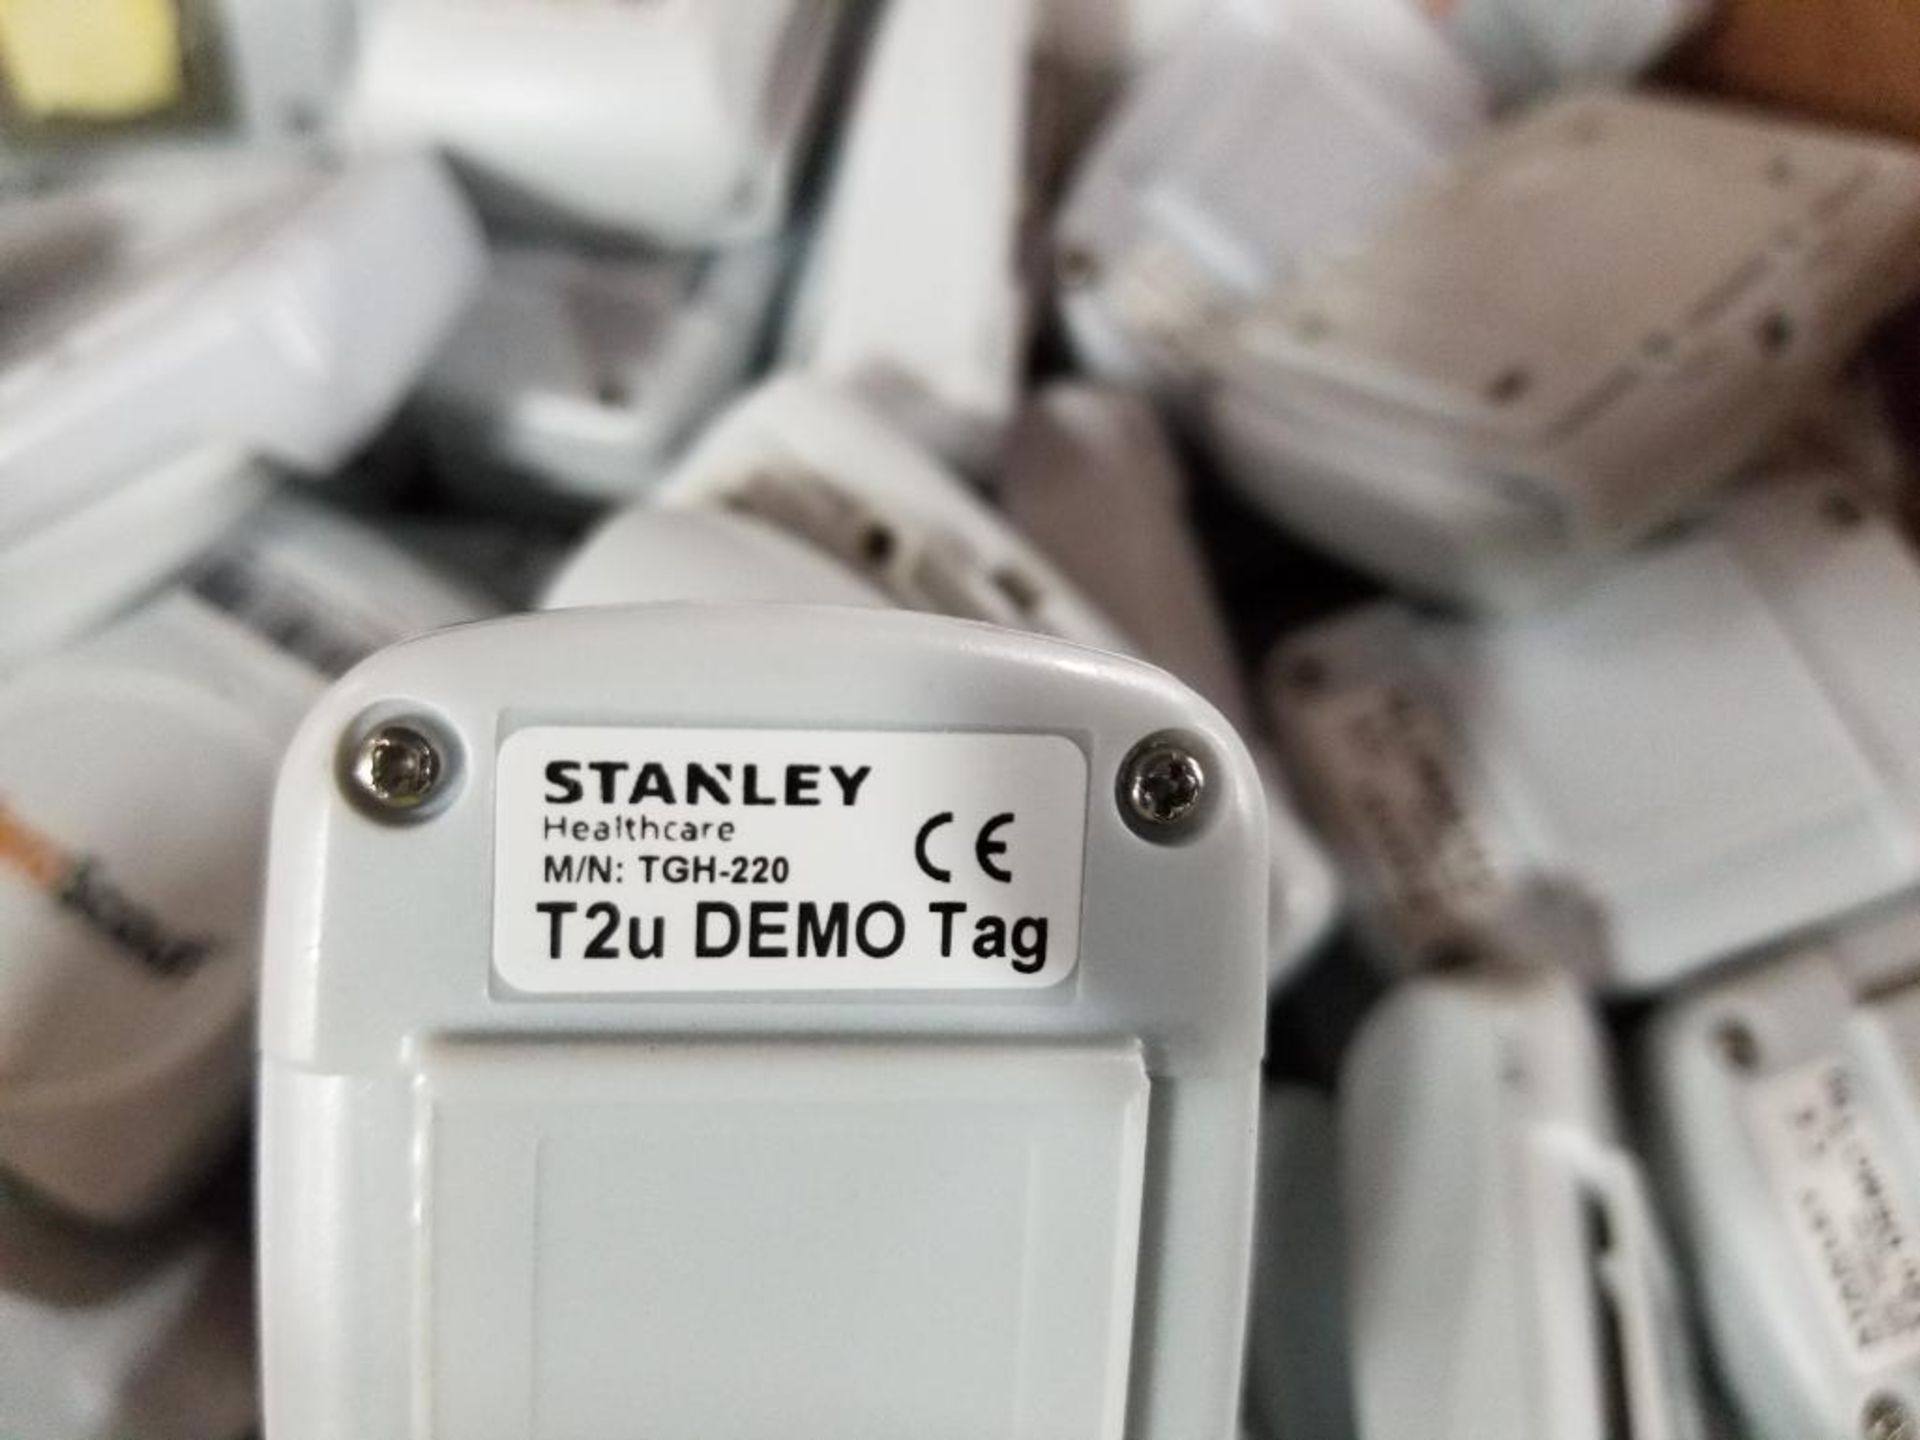 Large Qty of Stanley Healthcare AeroScout TGH-220 T2u DEMO Tag security tag. - Image 3 of 4